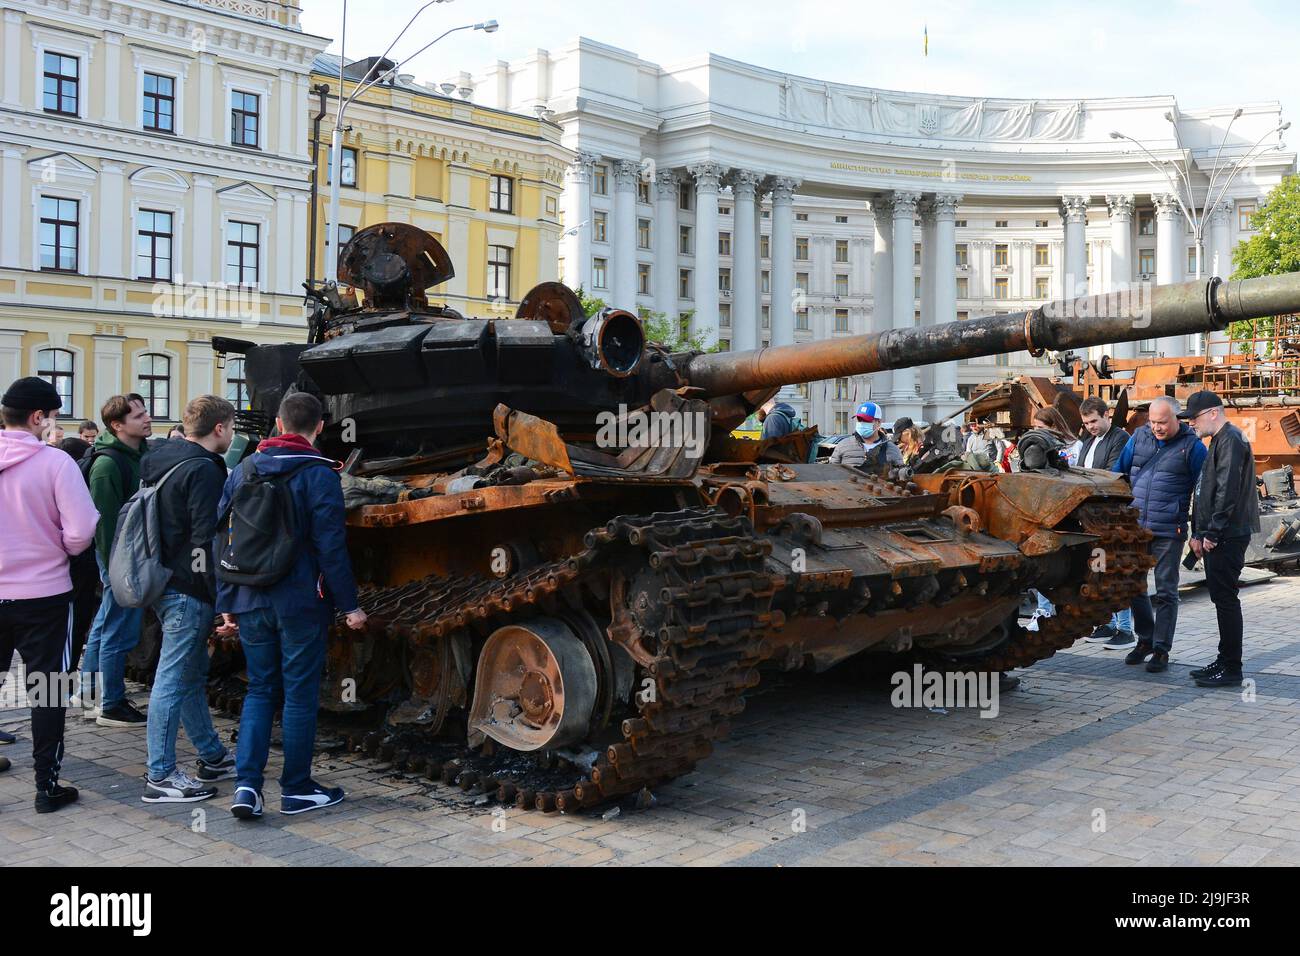 Kyiv, Ukraine. 23rd May, 2022. People seen looking at a Russian tank lined up at Mykhailivska Square. Russia invaded Ukraine on 24 February 2022, triggering the largest military attack in Europe since World War II. (Photo by Aleksandr Gusev/SOPA Images/Sipa USA) Credit: Sipa USA/Alamy Live News Stock Photo